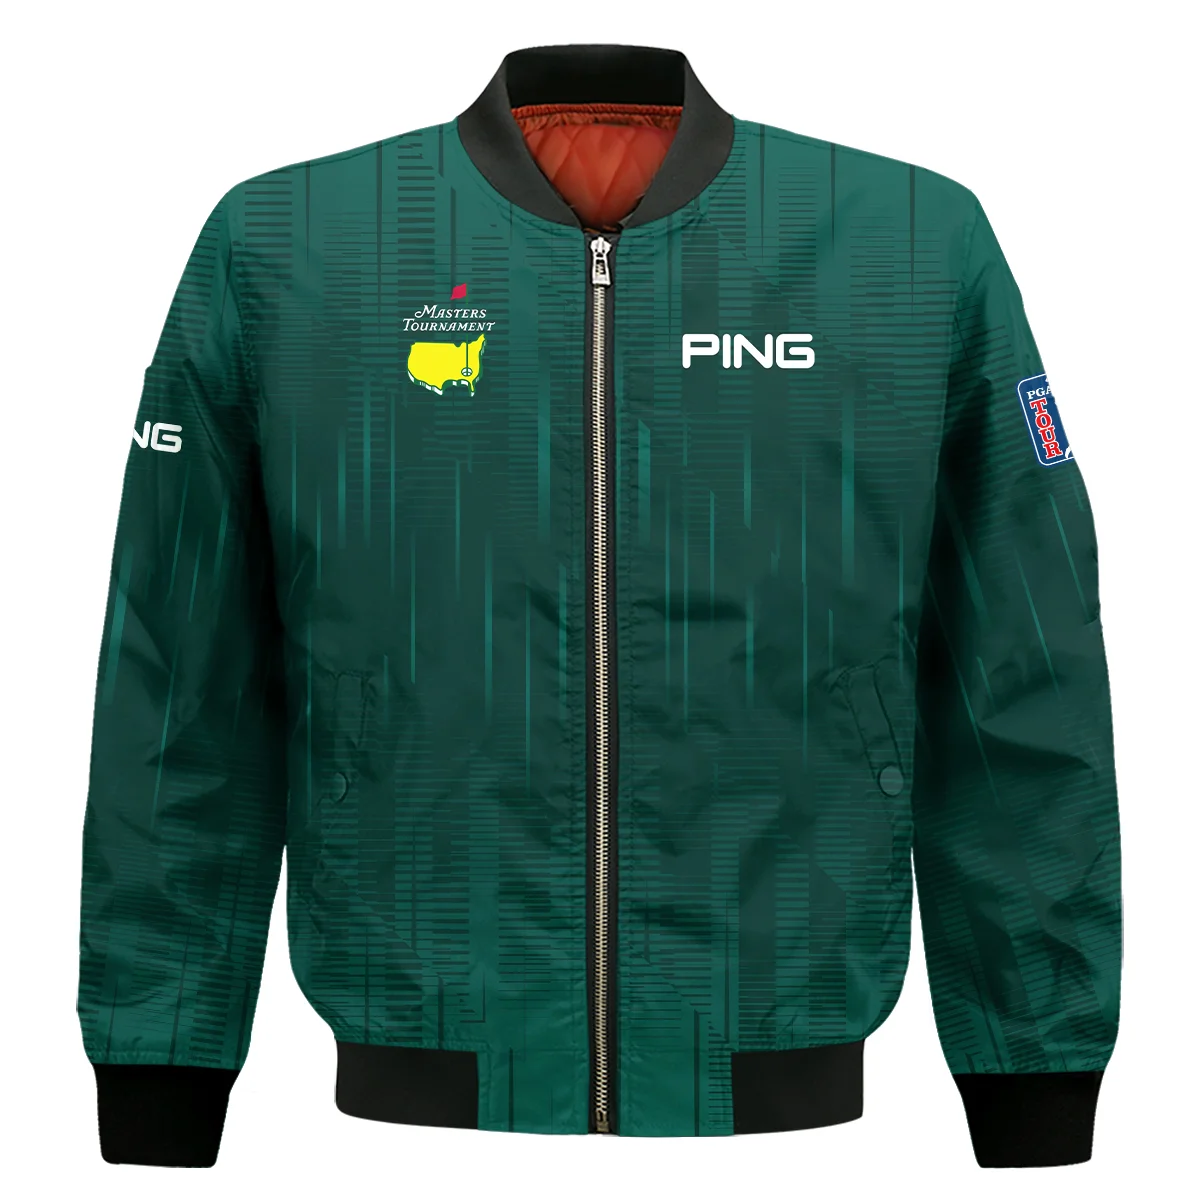 Masters Tournament Ping Dark Green Gradient Stripes Pattern Bomber Jacket Style Classic Bomber Jacket